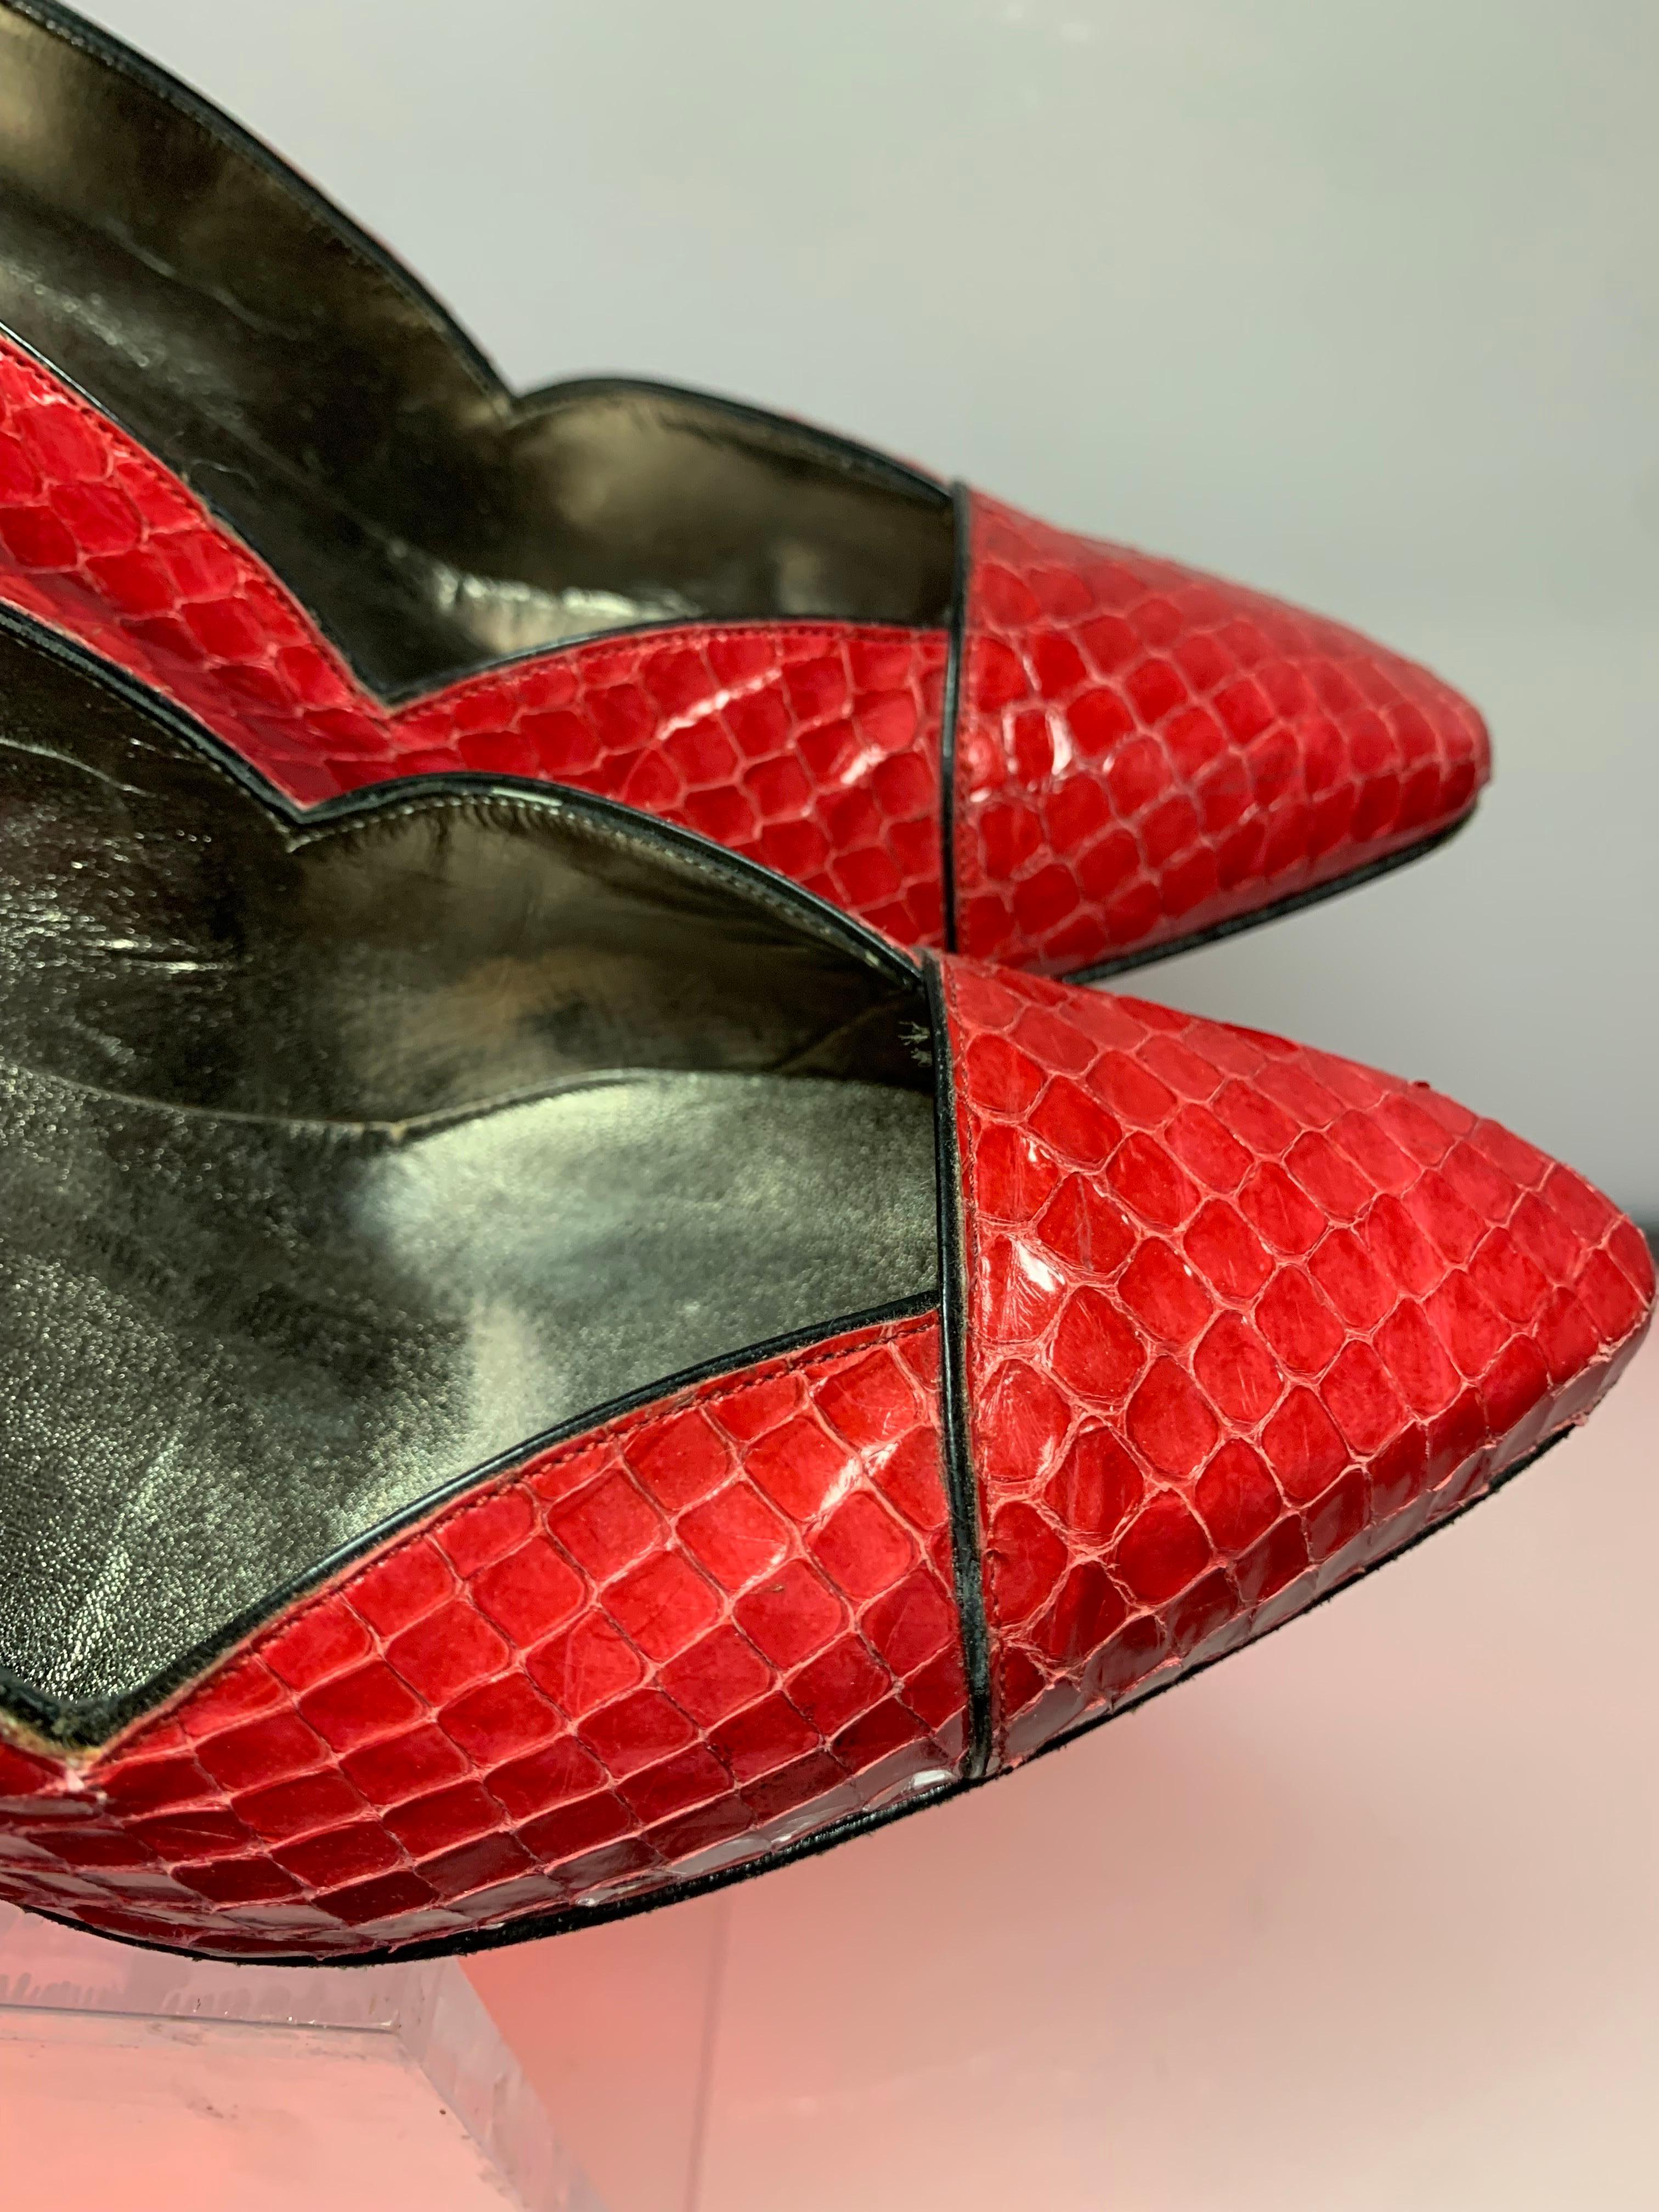 1980s Roberto Vianni Red Snakeskin Pumps Size 8 Medium:  Super 80s style heel and vamp details. Piped in black leather. Marked size 8 Med. 